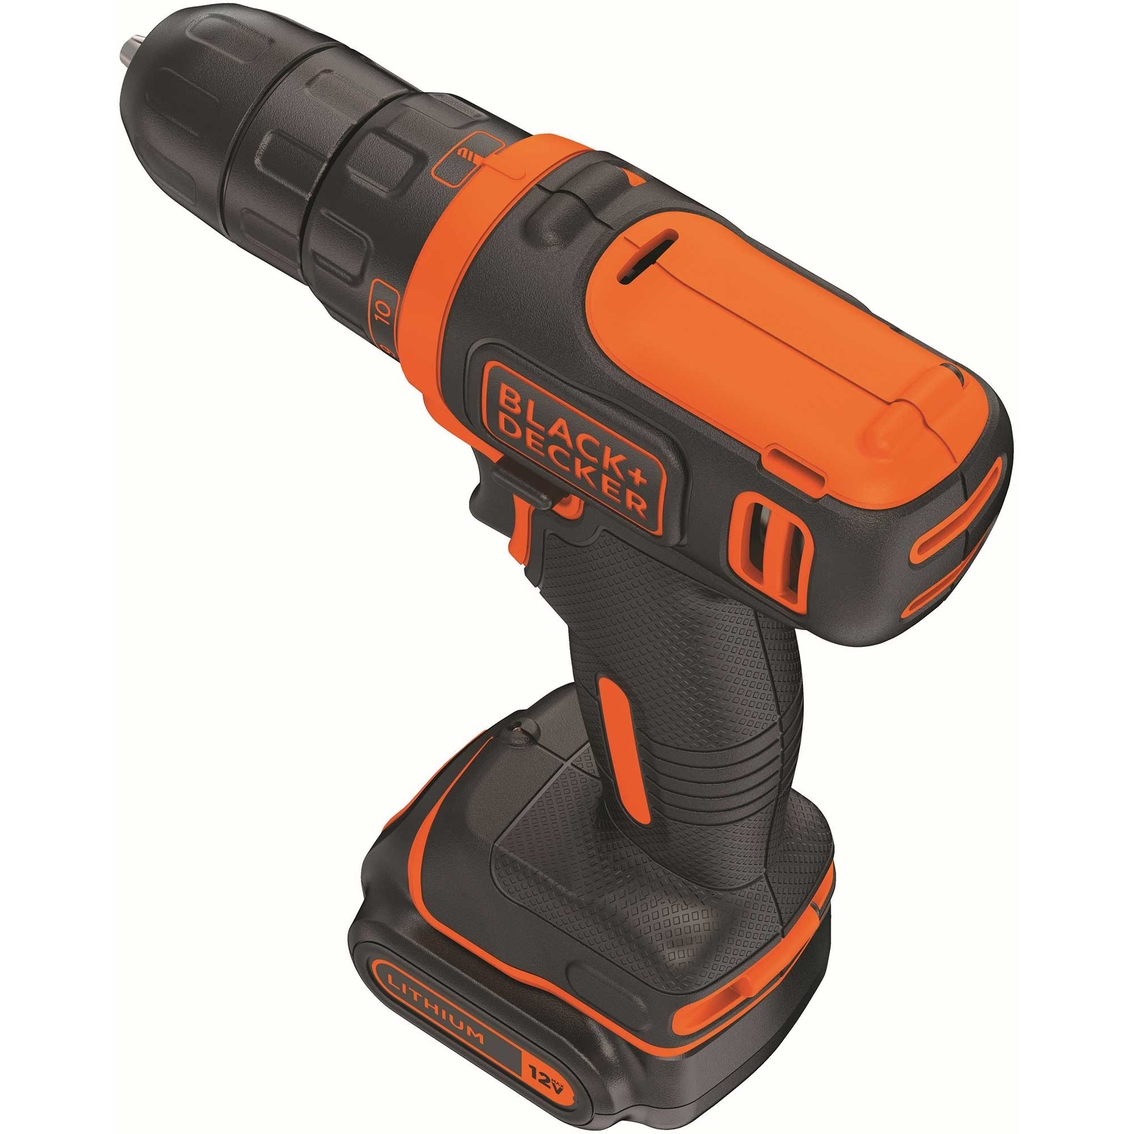 Black + Decker 12V Max Cordless Lithium Drill/Driver Project Kit - Image 3 of 10